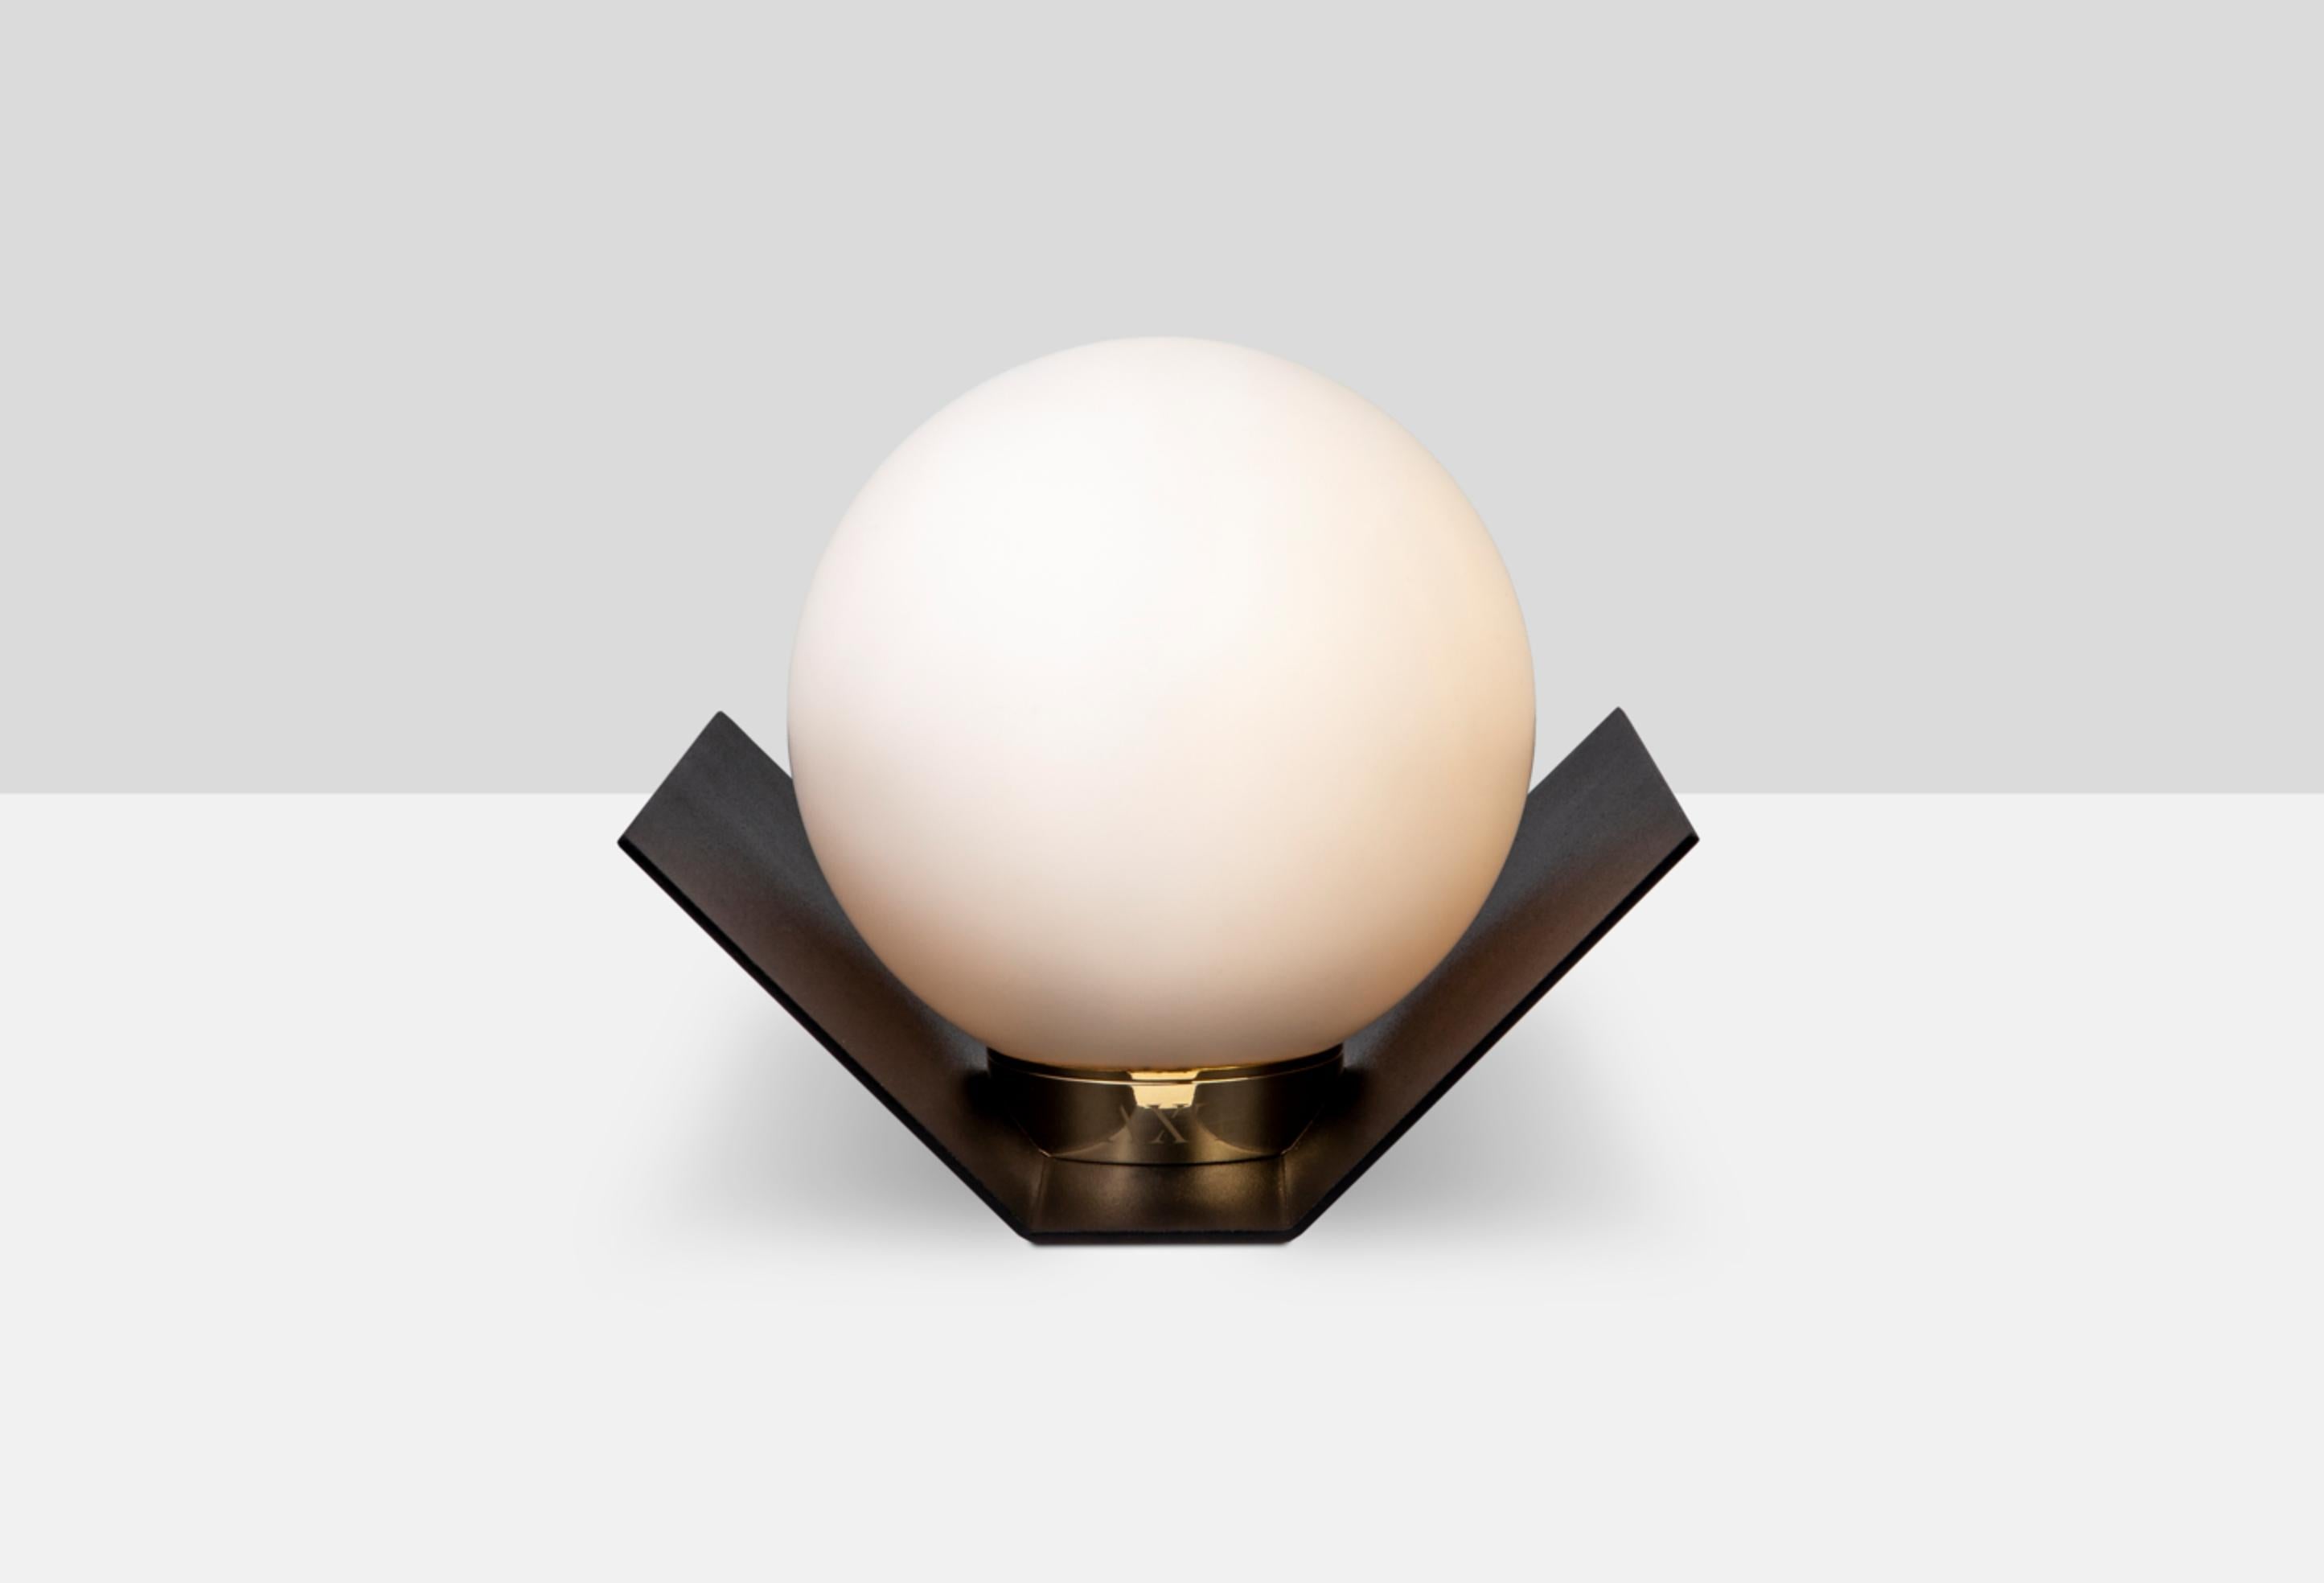 Twain Ex jet black wall light by Lexavala
Dimensions: W 16 x D 16 x H 13 cm 
Materials: brass or stainless steel ring touching the glass.

There are two lenghts of socket covers, extending over the LED. Two short are to be found in Suspended and